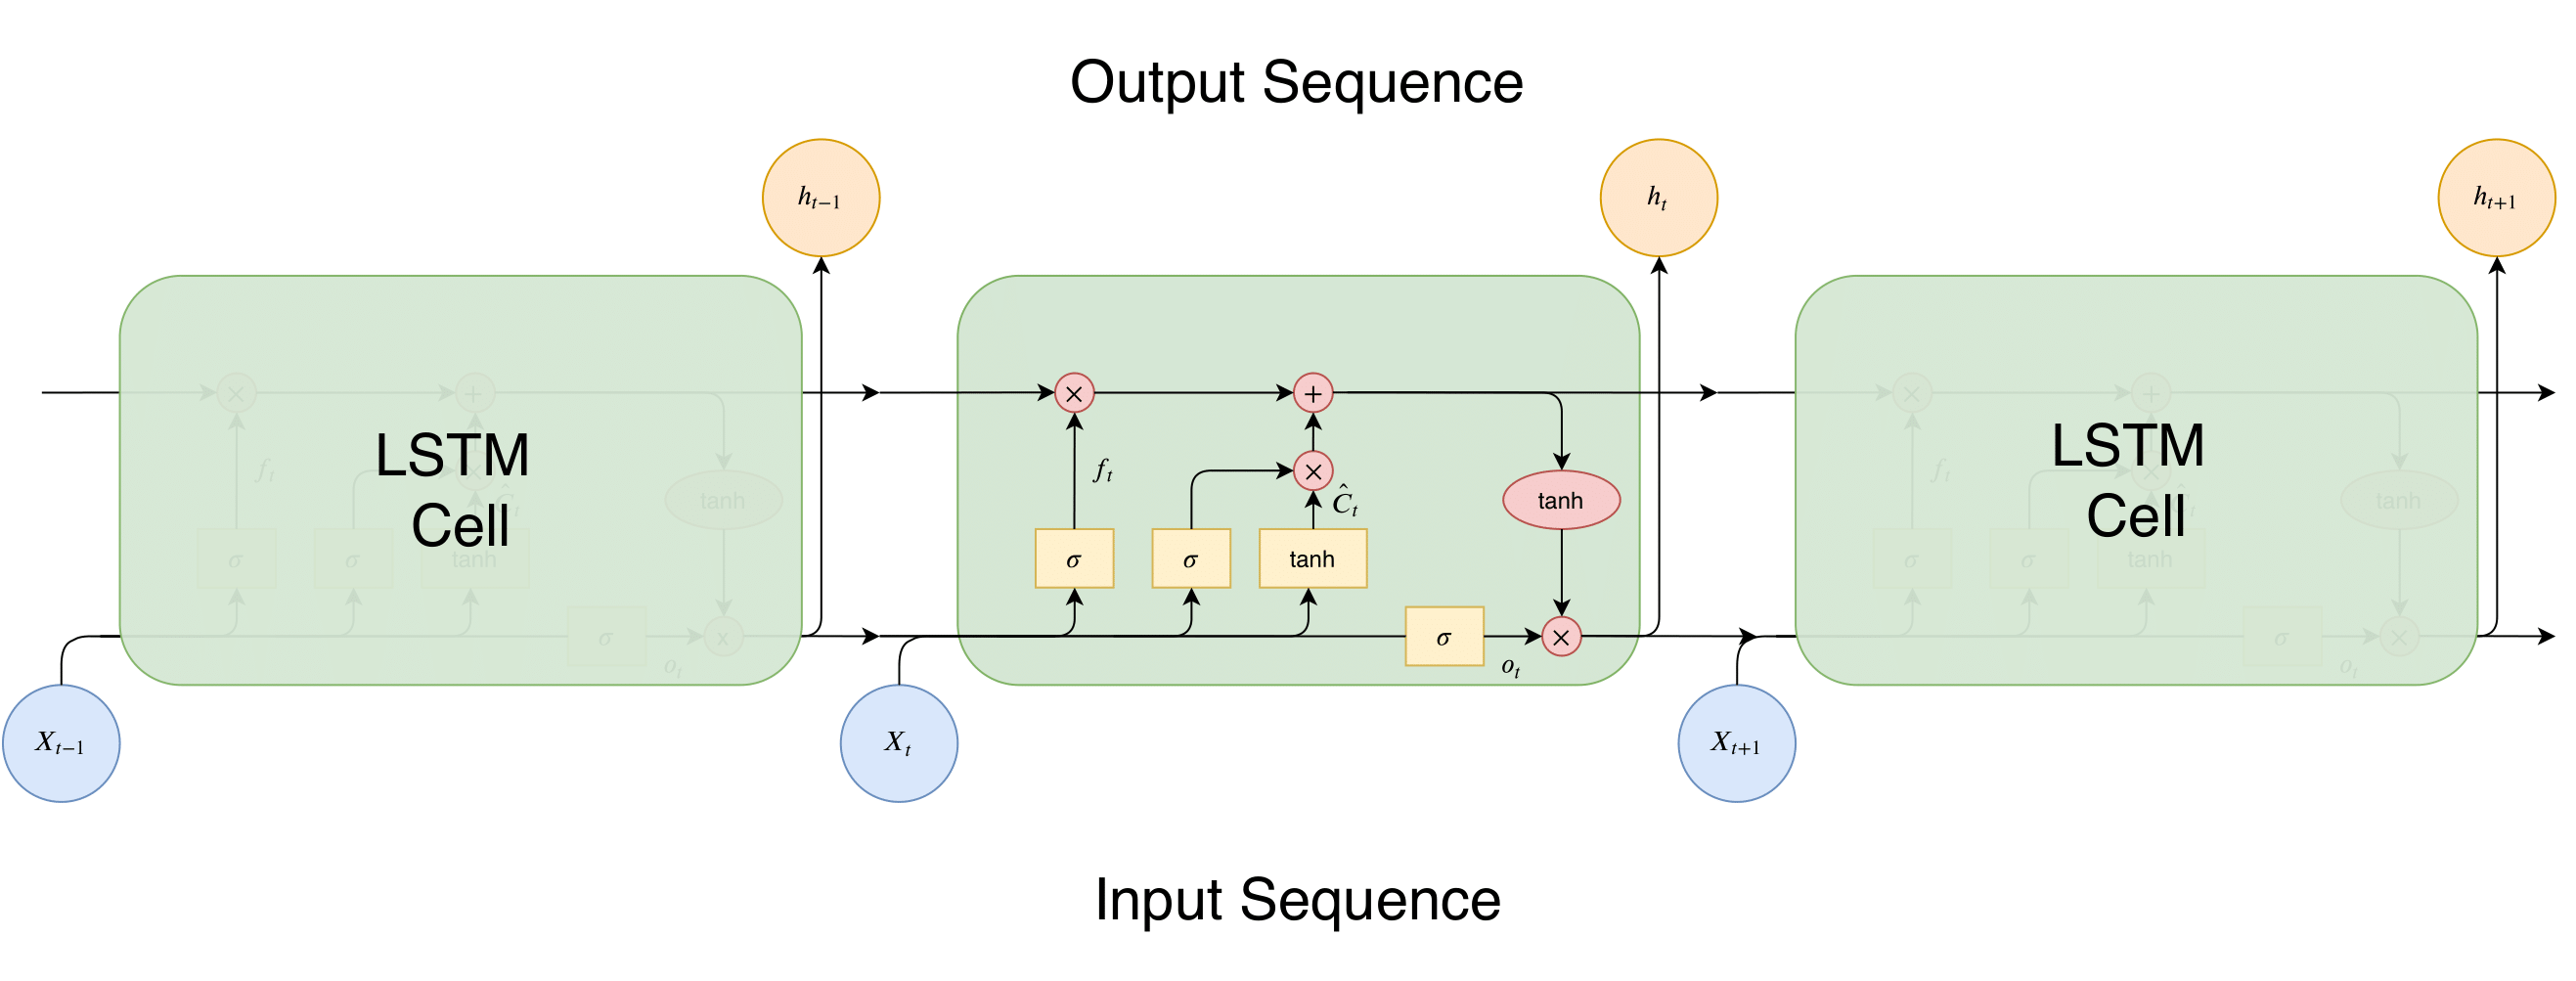 LSTM cells chained together